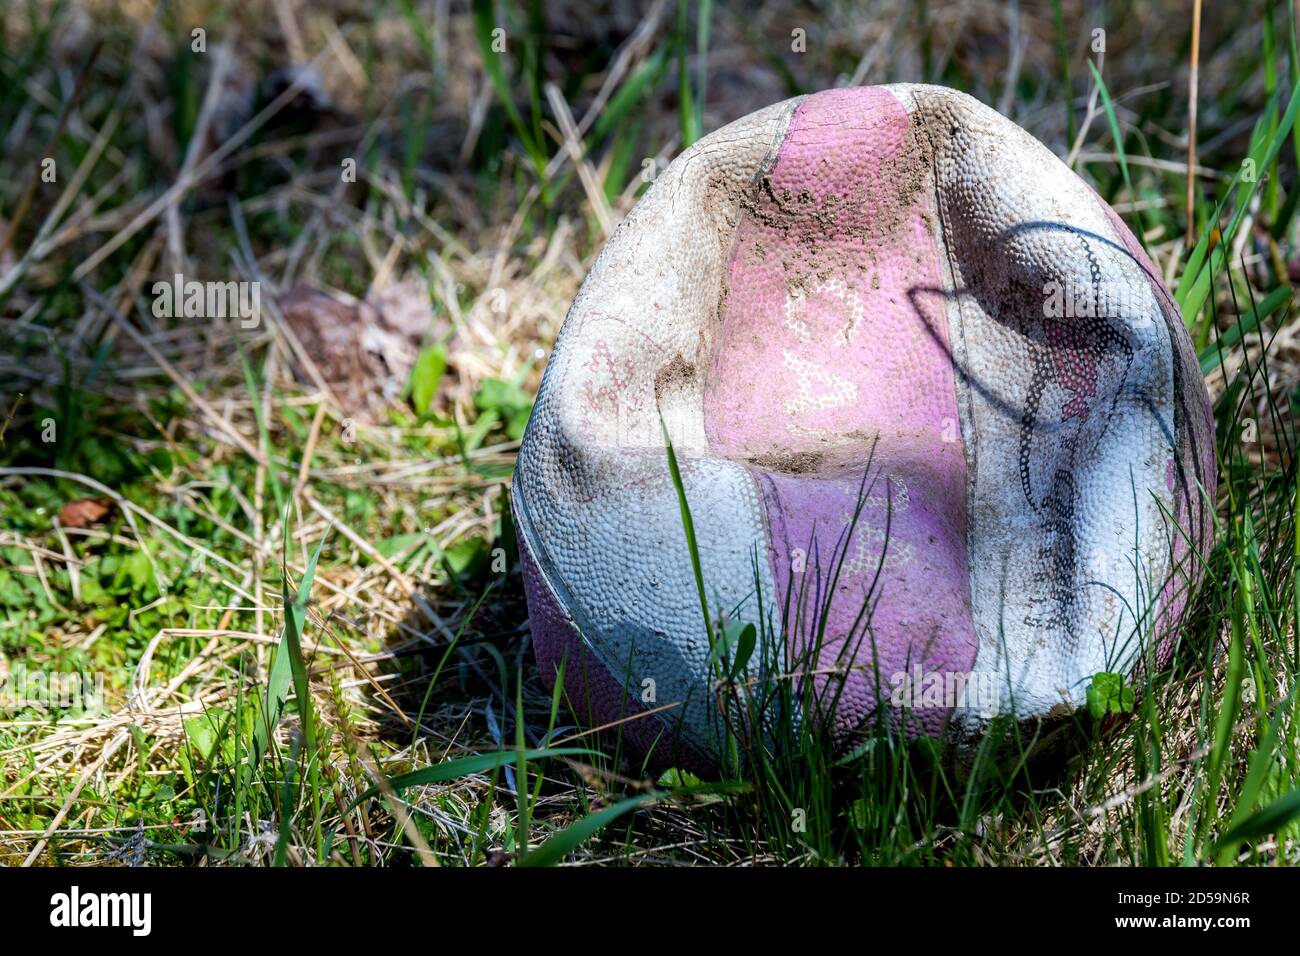 An old, faded, and deflated basketball lying in grass. Part shade and part sunlight on the ball. The ball is also dirty. Stock Photo